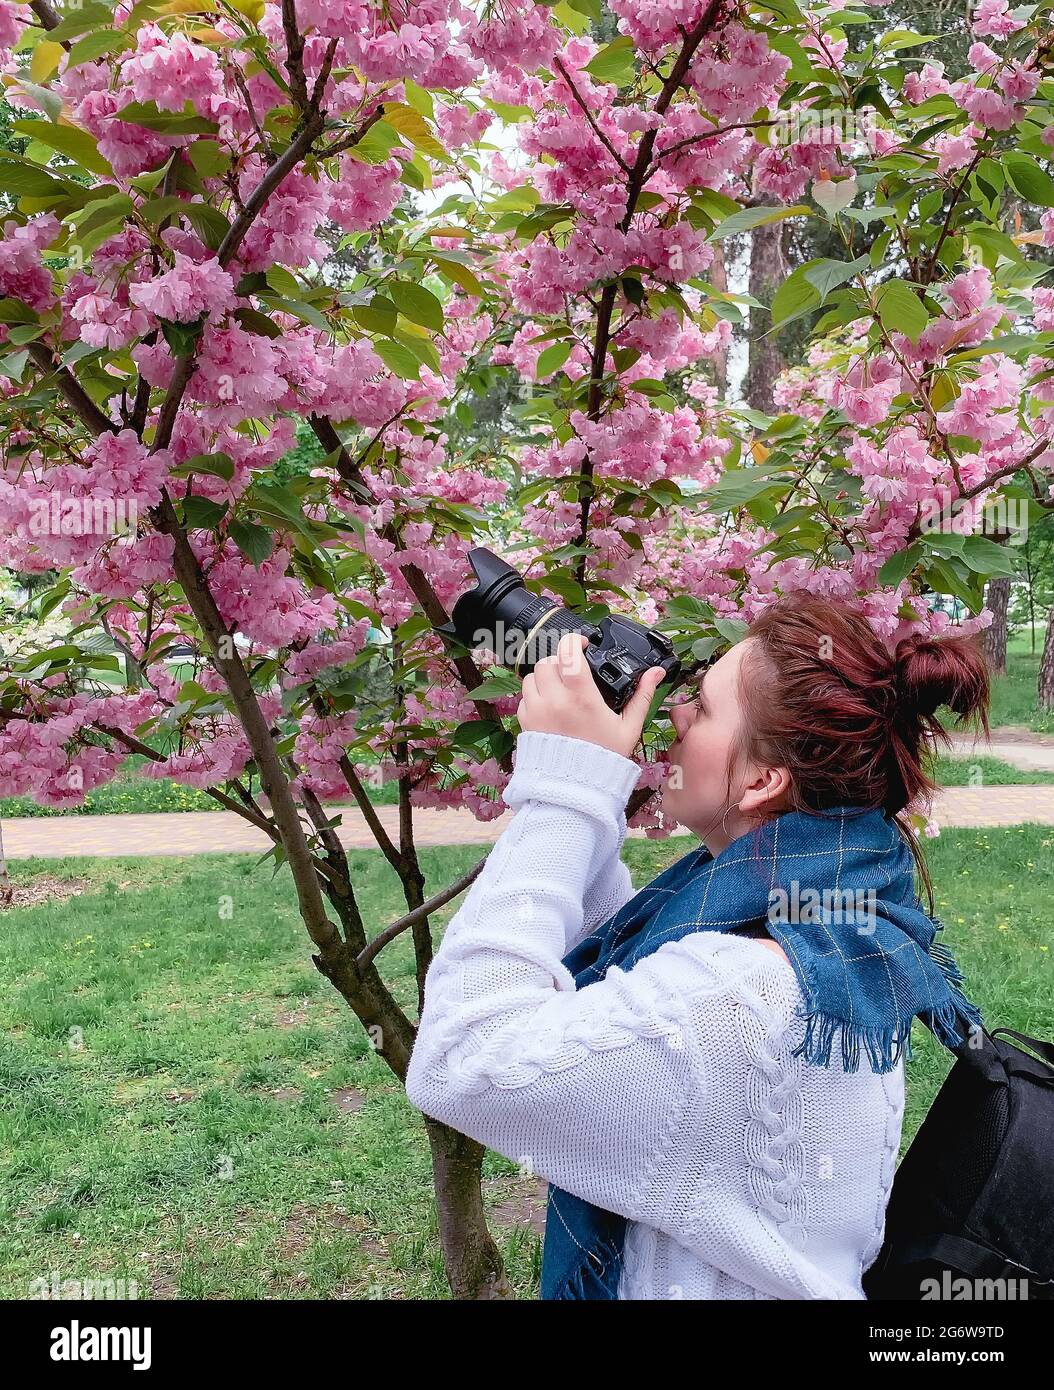 young happy smiling red-haired woman with a white sweater and blue scarf takes a picture with a flowering pink sakura tree in a park in the city of Ki Stock Photo